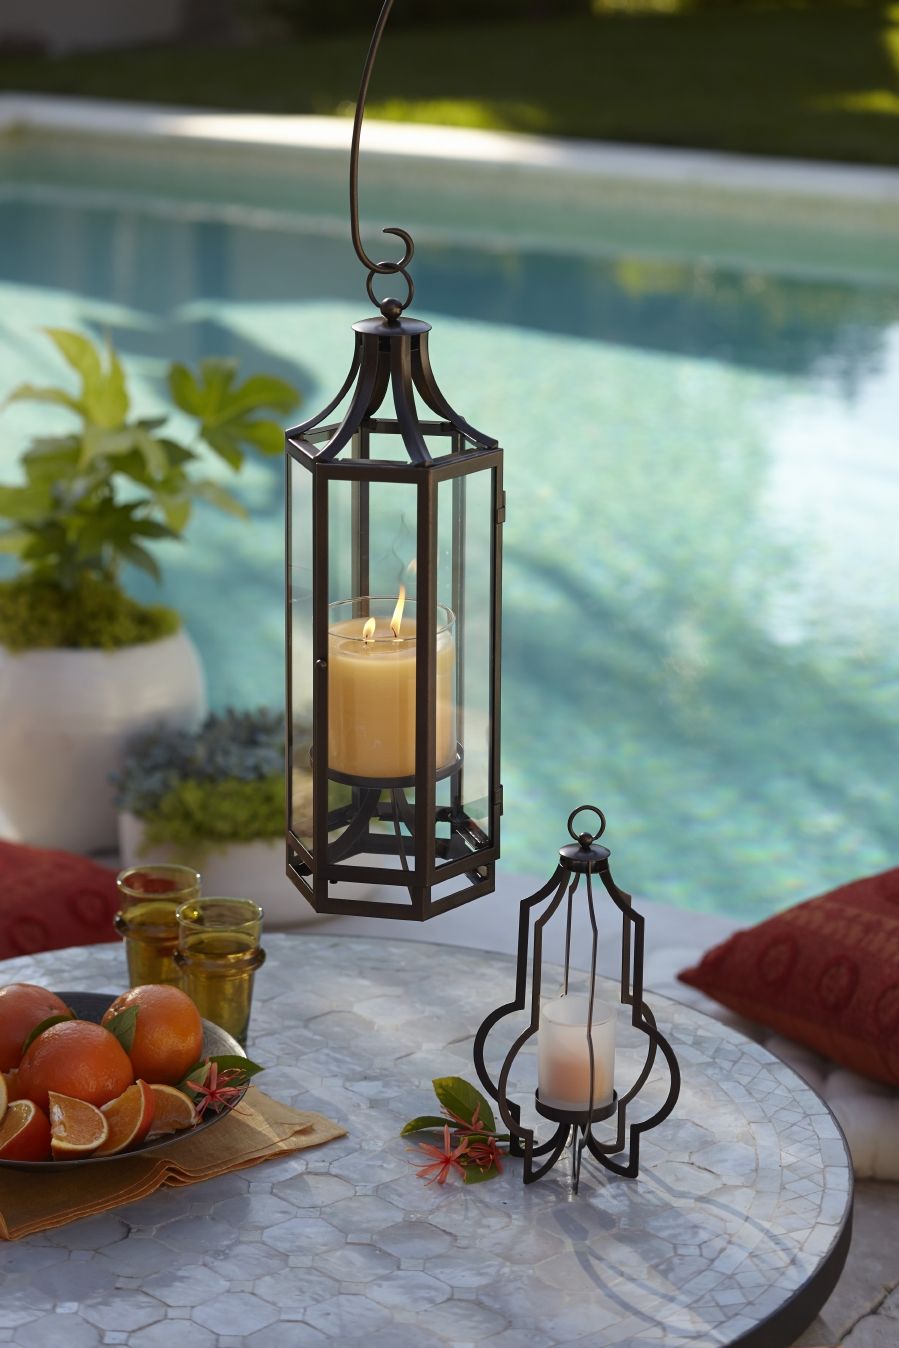 zodax candle holders hanging metal and glass lantern